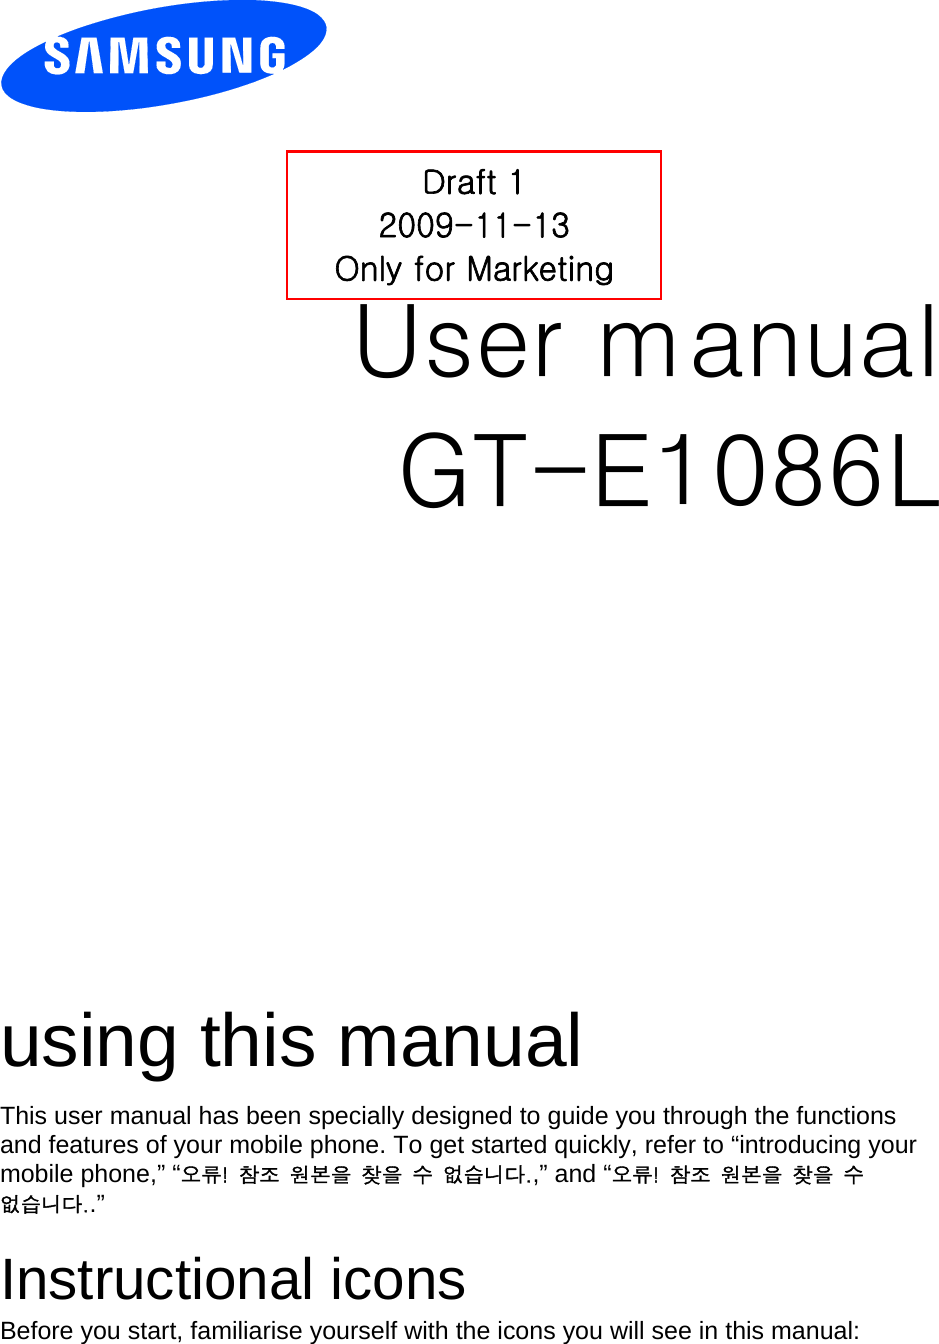          User manual Draft 1 2009-11-13 Only for Marketing GT-E1086L                  using this manual This user manual has been specially designed to guide you through the functions and features of your mobile phone. To get started quickly, refer to “introducing your mobile phone,” “오류!  참조  원본을  찾을  수  없습니다.,” and “오류!  참조  원본을  찾을  수 없습니다..”  Instructional icons Before you start, familiarise yourself with the icons you will see in this manual:   